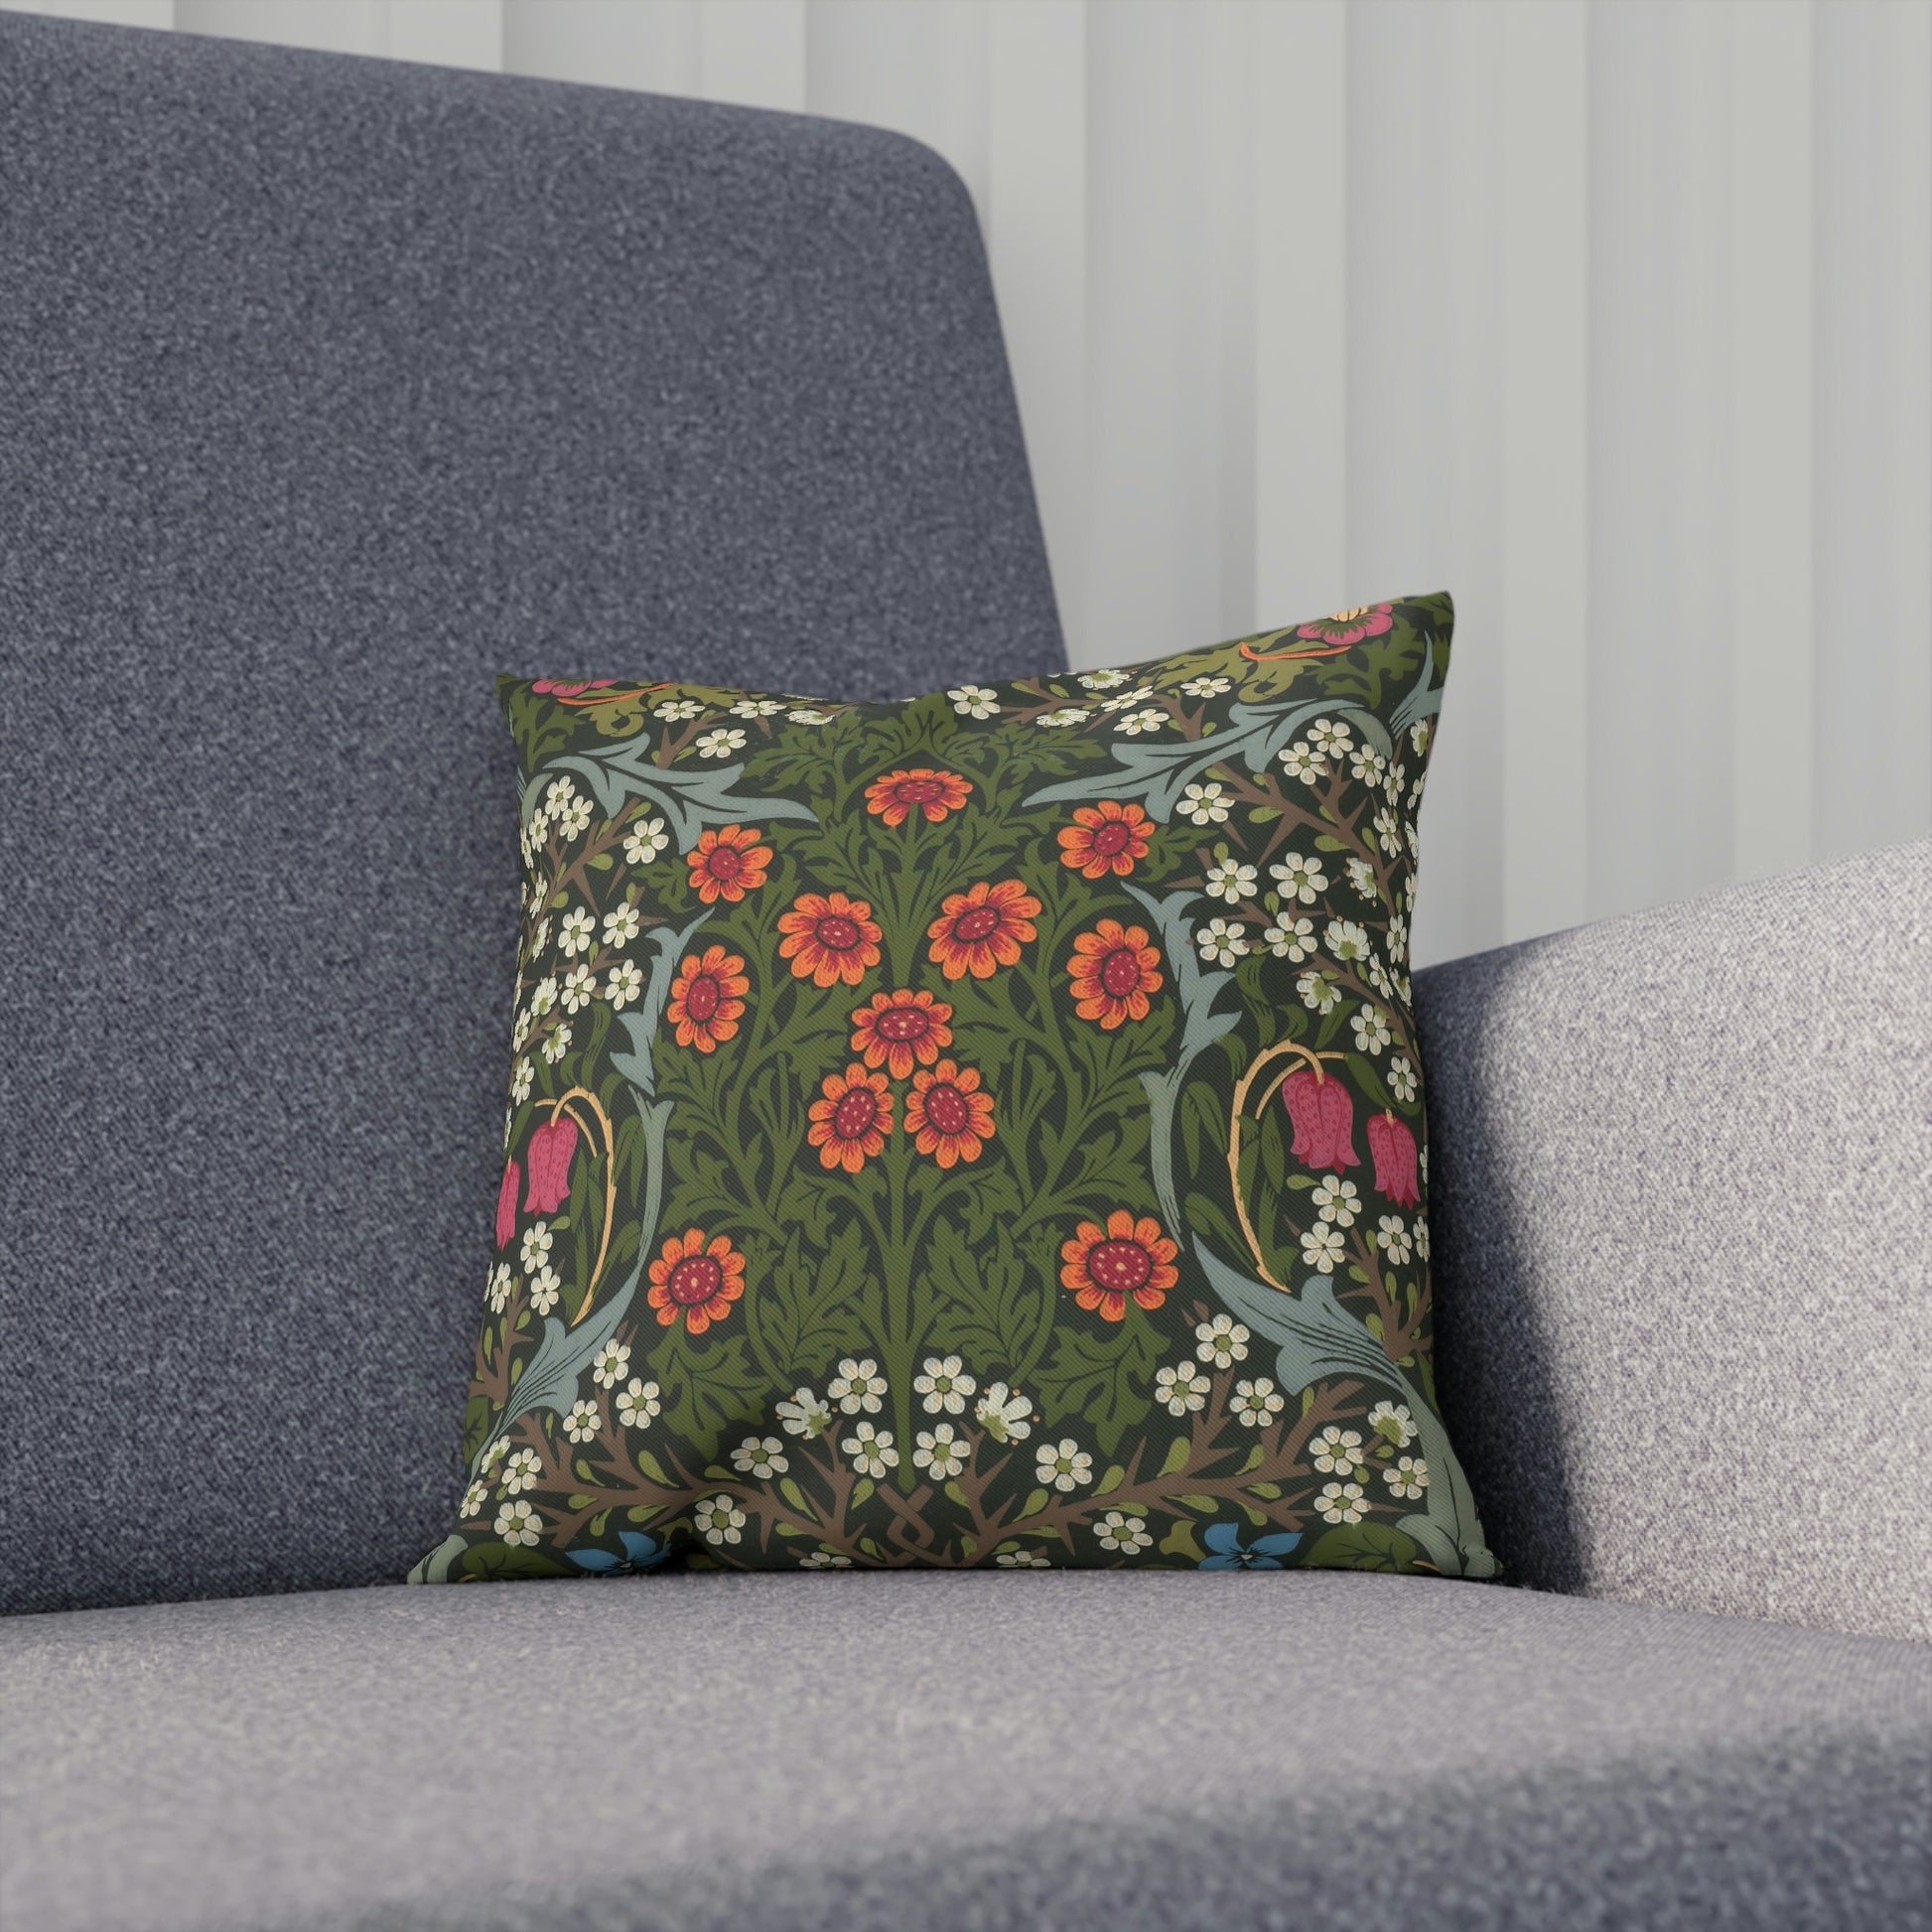 william-morris-cushion-and-cushion-cover-blackthorn-collection-11